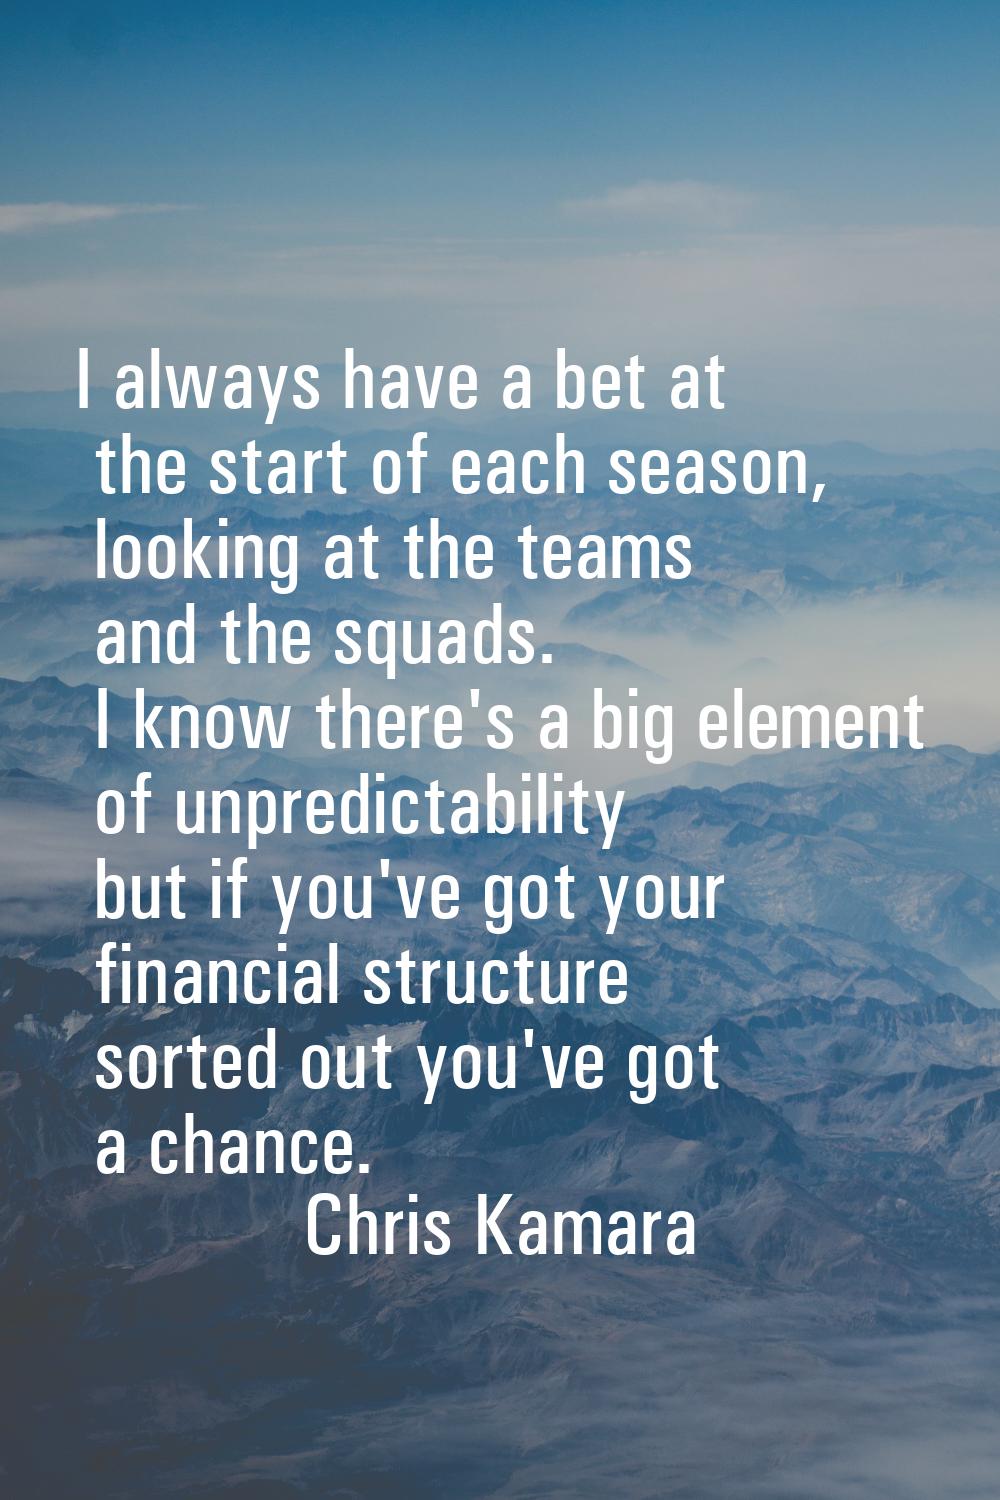 I always have a bet at the start of each season, looking at the teams and the squads. I know there'